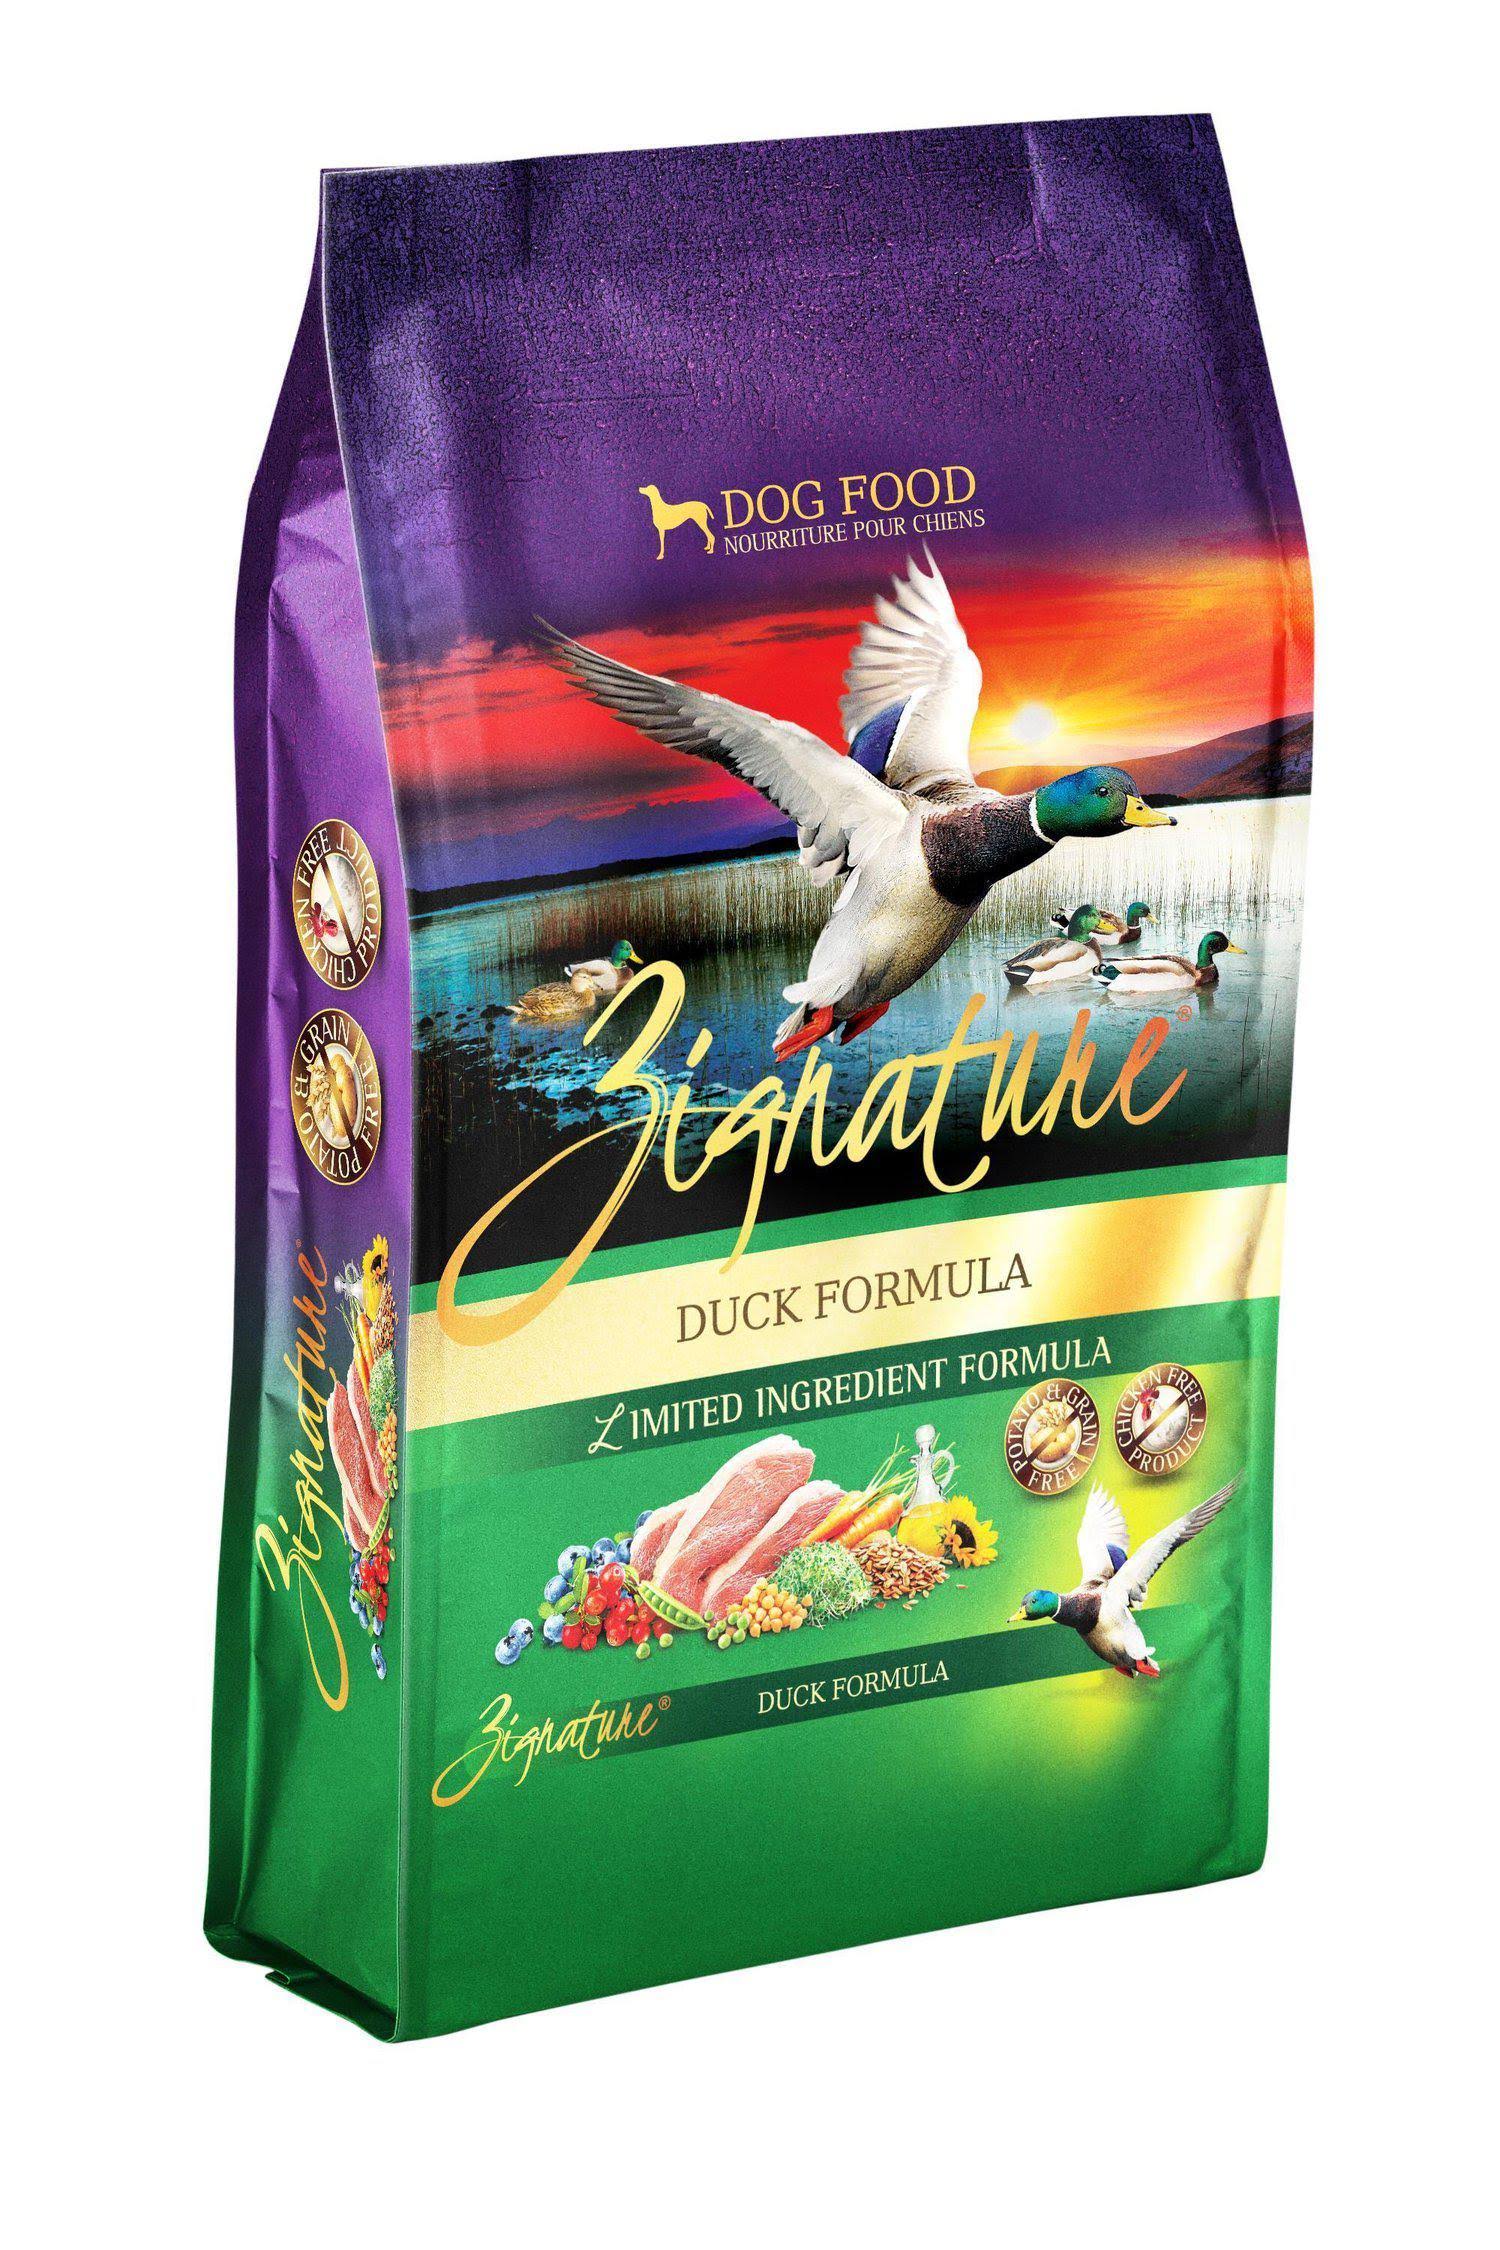 Zignature Duck Limited Ingredient Formula Dry Dog Food 13.5 lbs